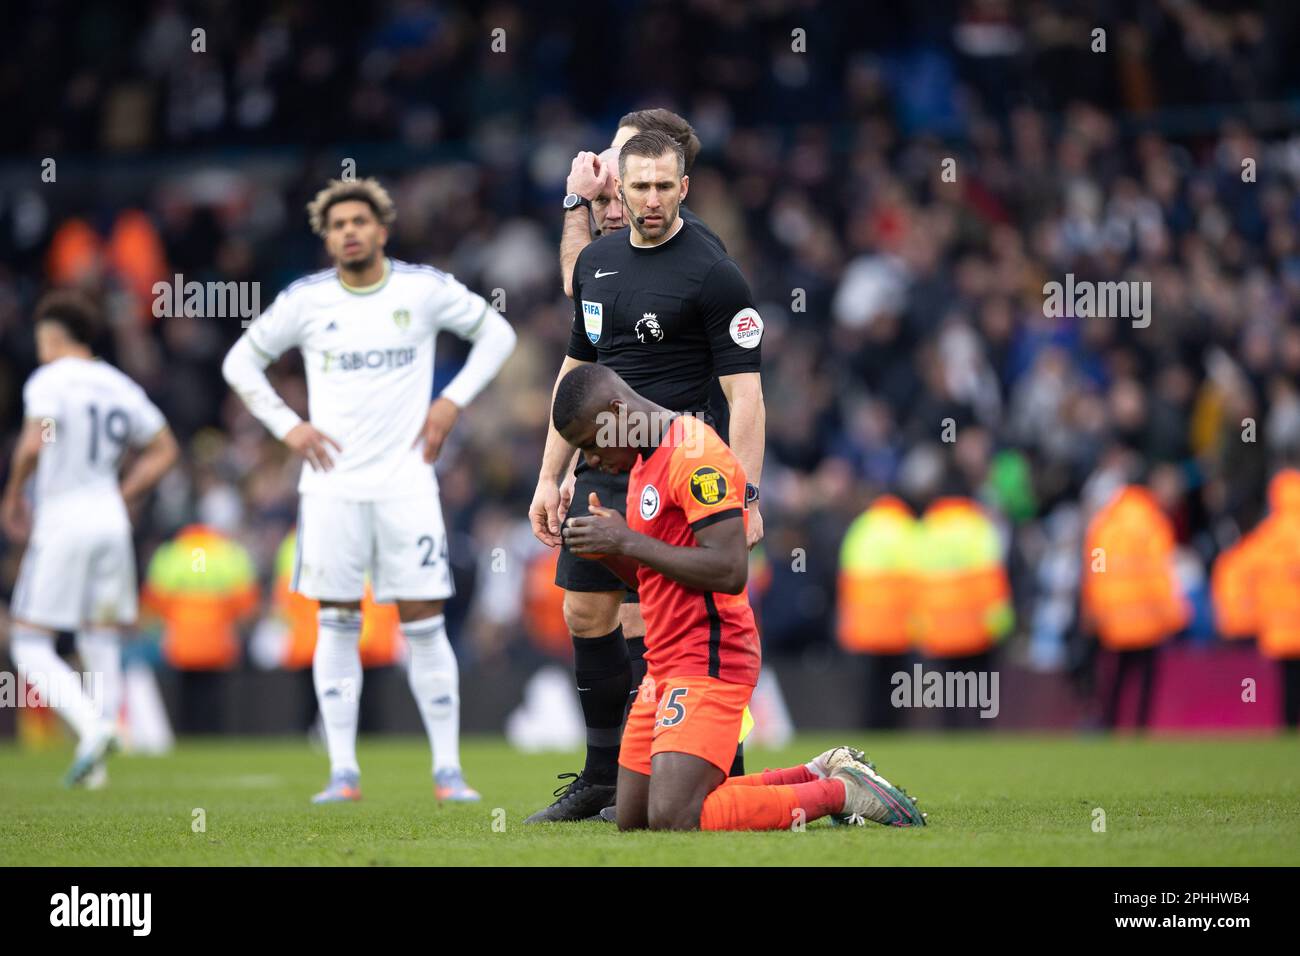 Paul Tierney, the match referee, watches as Moisés Caicedo of Brighton & Hove Albion genuflects during the Premier League match between Leeds United and Brighton & Hove Albion at Elland Road, Leeds on Sunday 12th March 2023. (Photo: Pat Scaasi | MI News) Credit: MI News & Sport /Alamy Live News Stock Photo